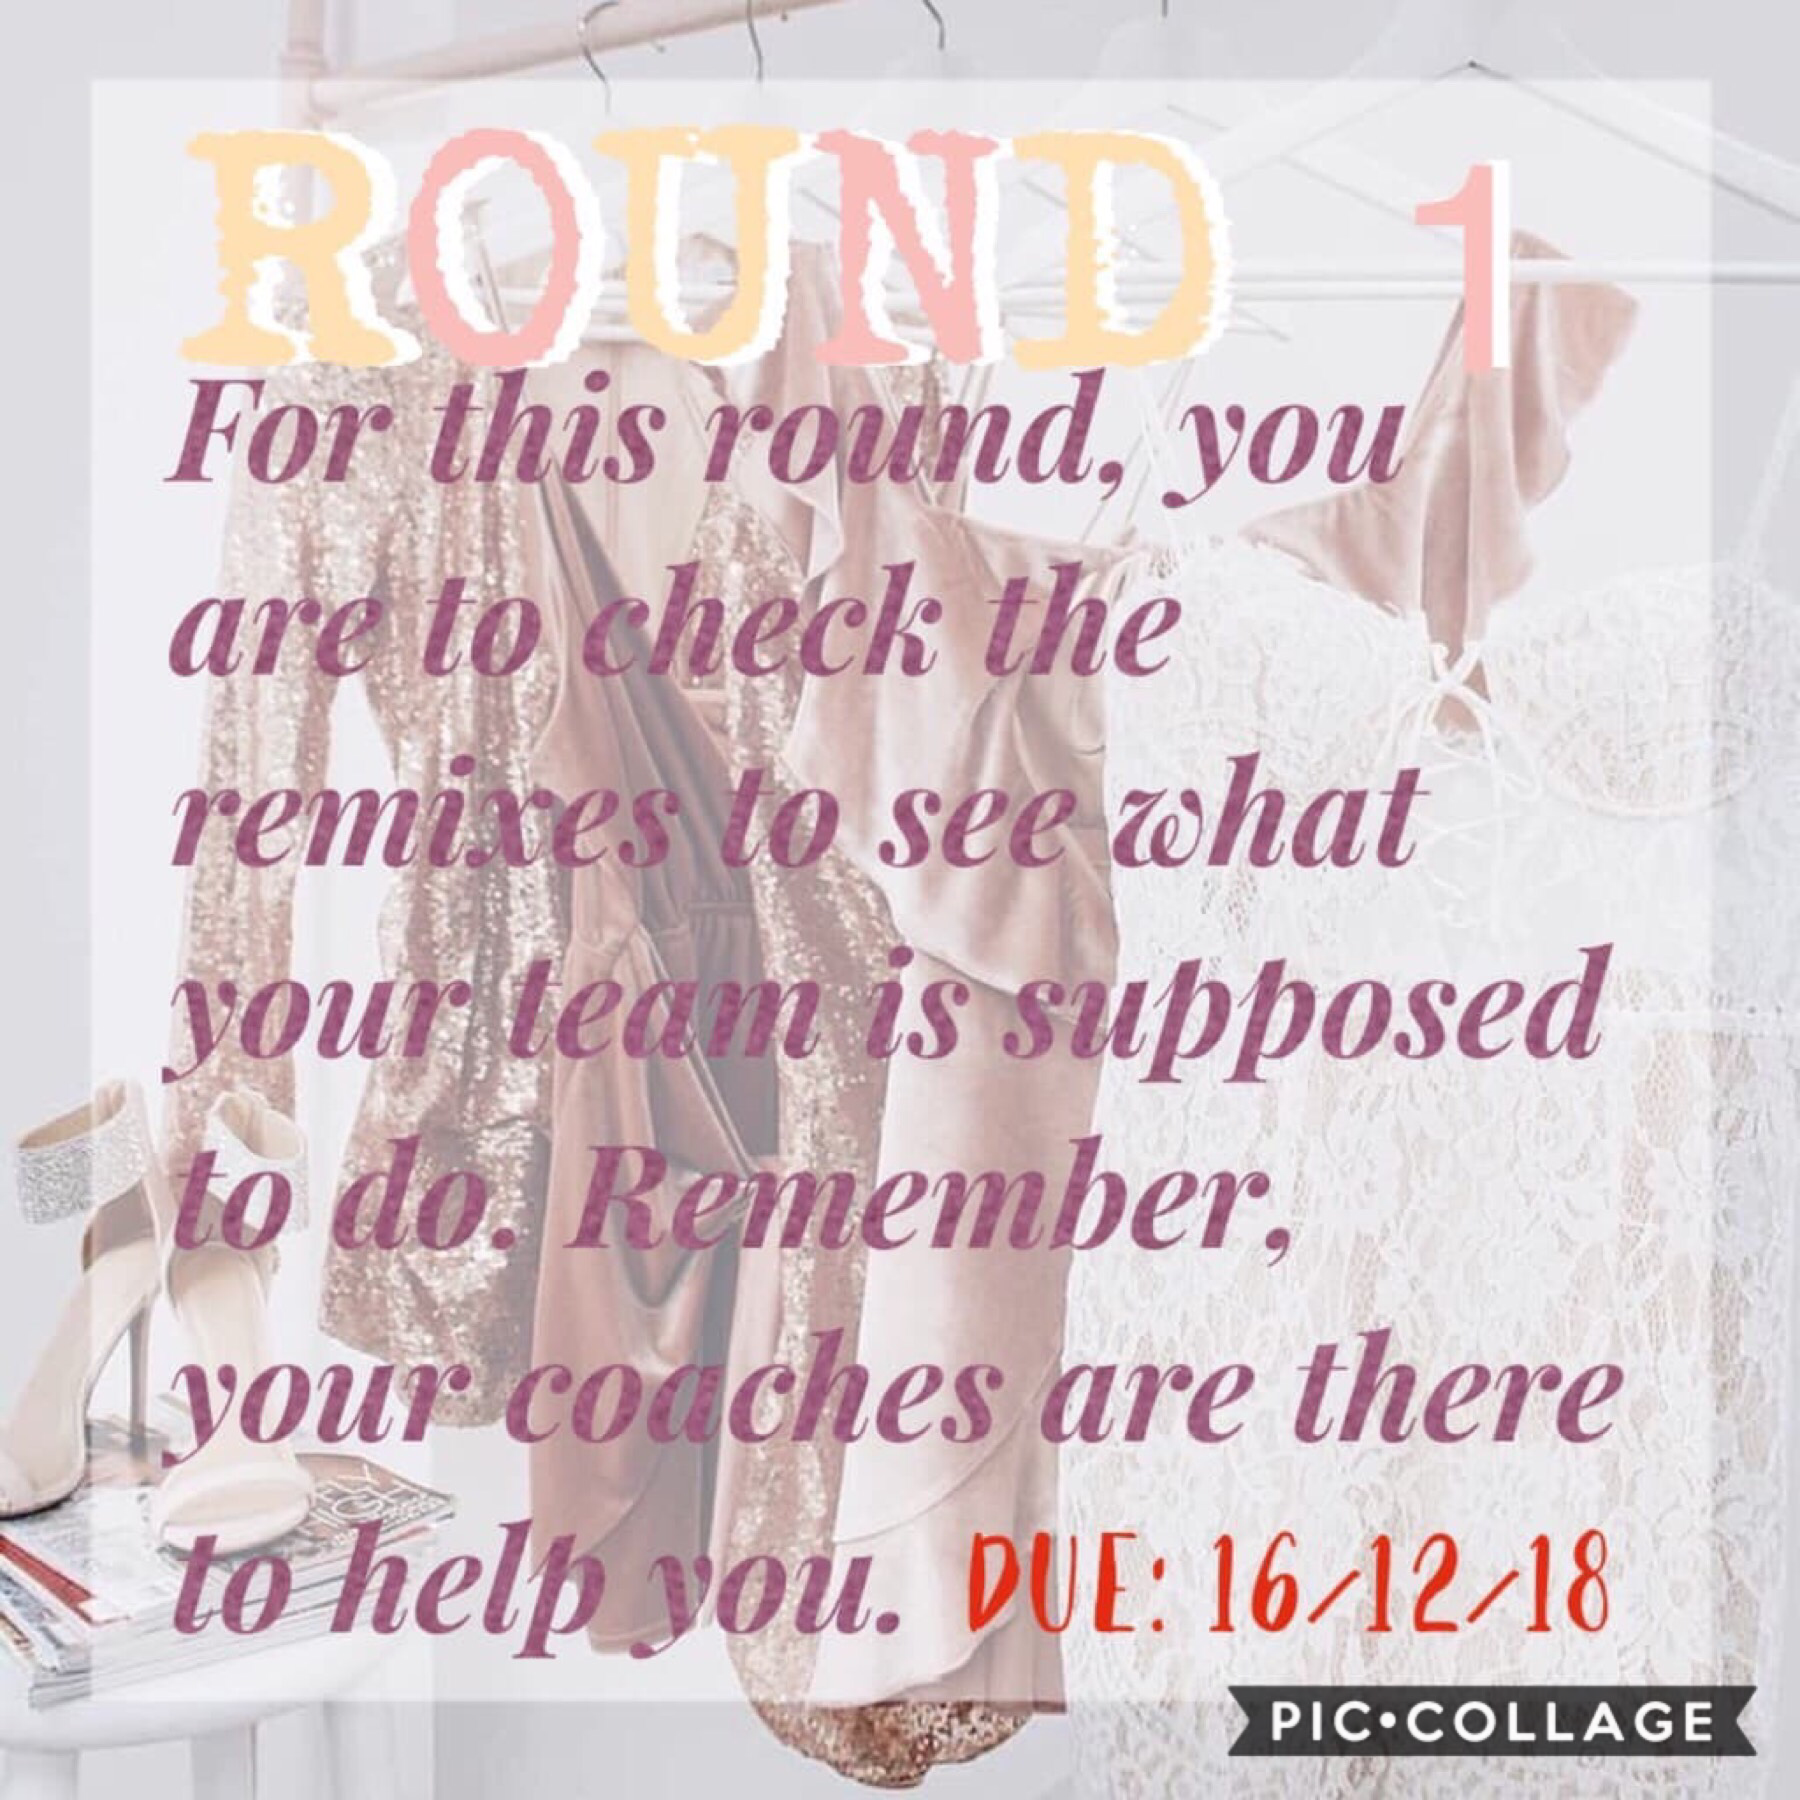 Round 1! Check the remixes to find out what to do and remember your coaches are here to help you 💖🌸